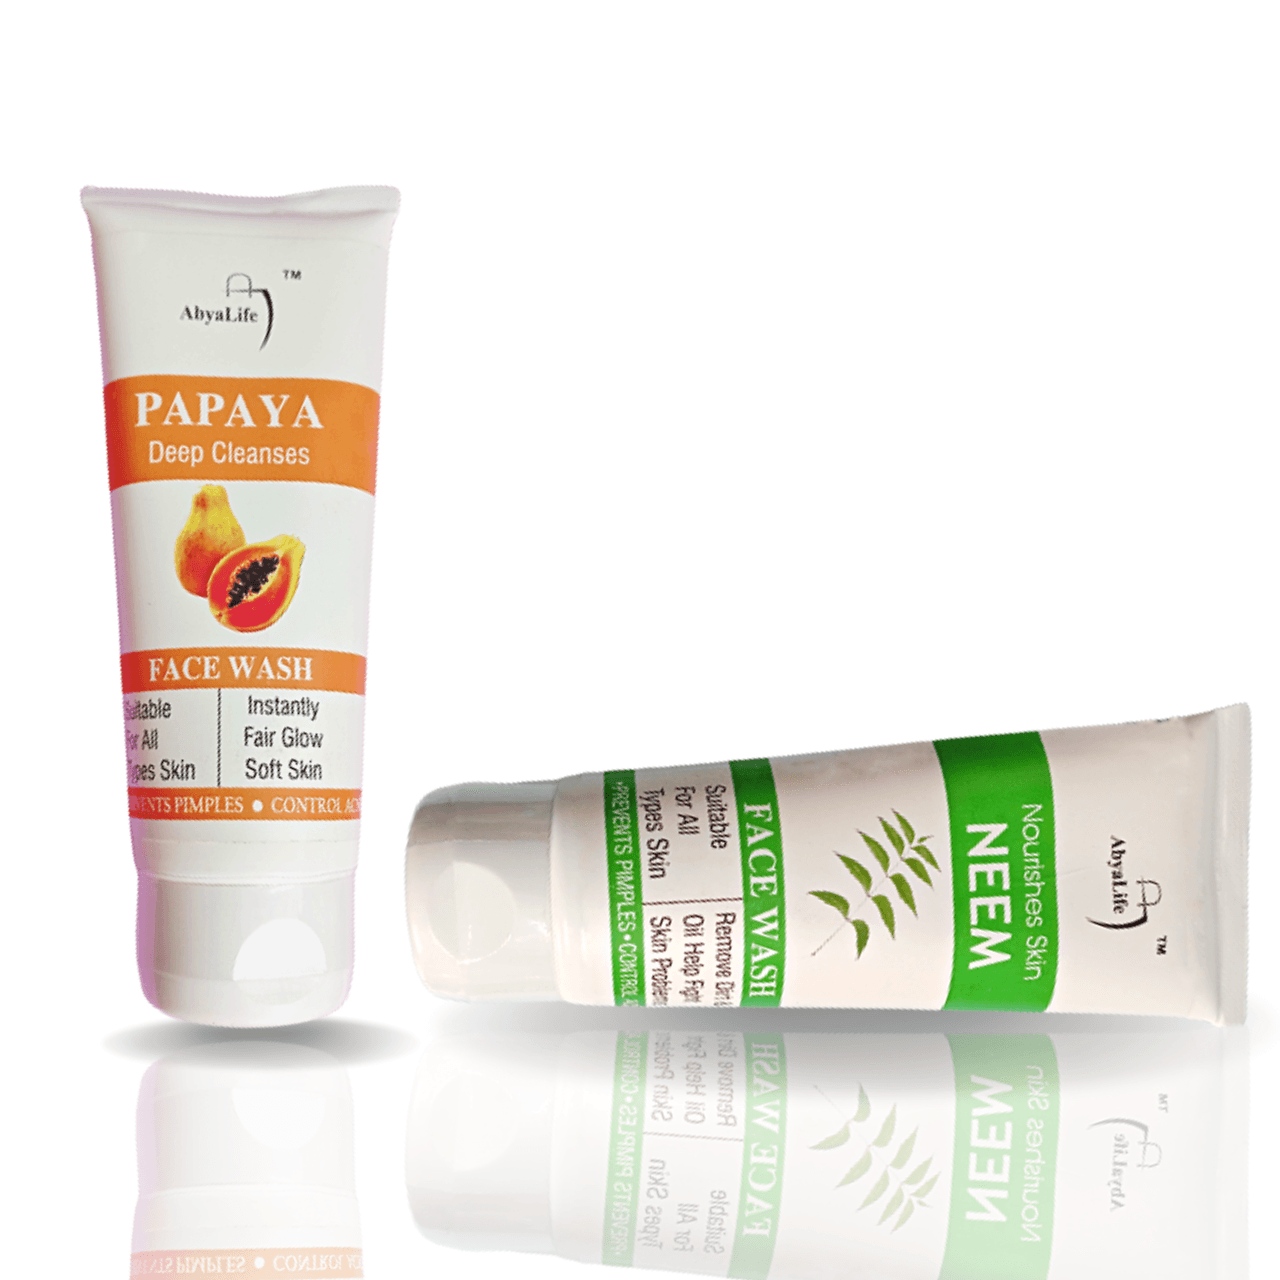 Time to unleash your inner radiance!  The AbyaLife Papaya & Neem Facewash Combo is your key to an exfoliating, purifying, and glowing transformation. Papaya enzymes gently remove dead skin cells, revealing a brighter complexion. Neem's antibacterial magic fights blemishes and nourishes deeply, leaving your skin feeling refreshed and radiant. Discover the power of nature's cleansing duo and let your natural confidence shine! #ayurvedaskincare #abyalife #brightenskin